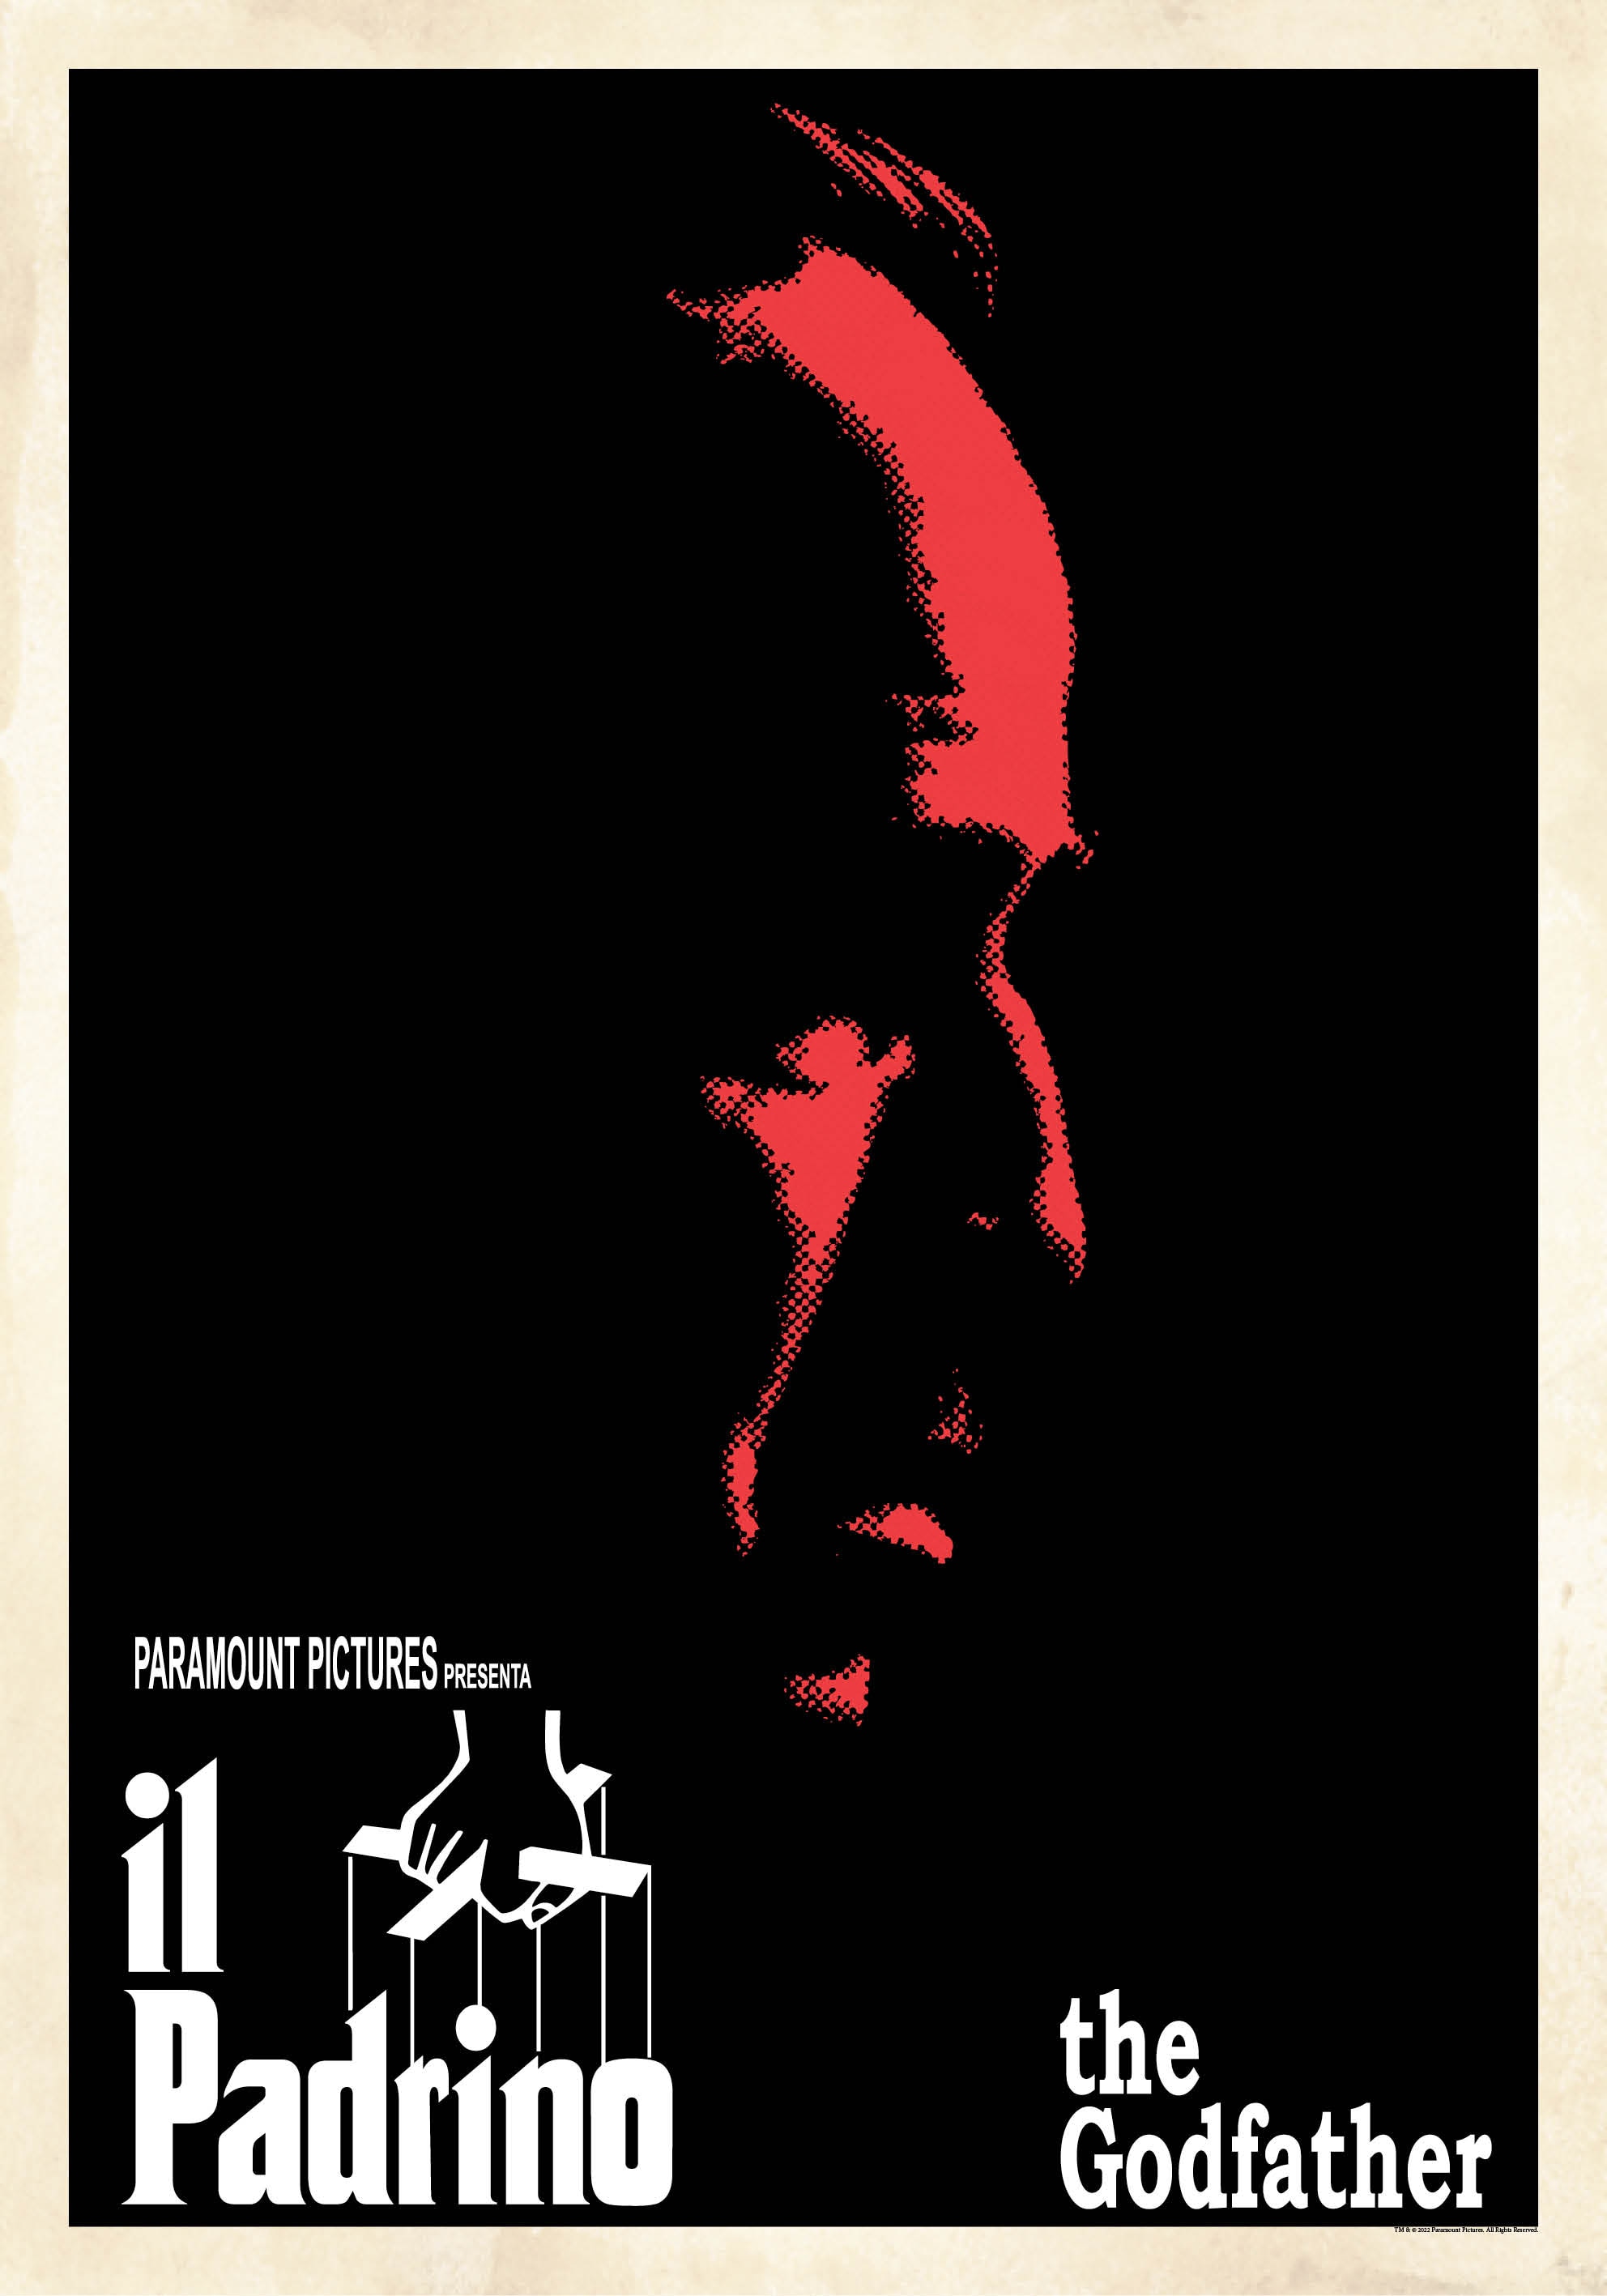 The Godfather - Il Padrino Poster